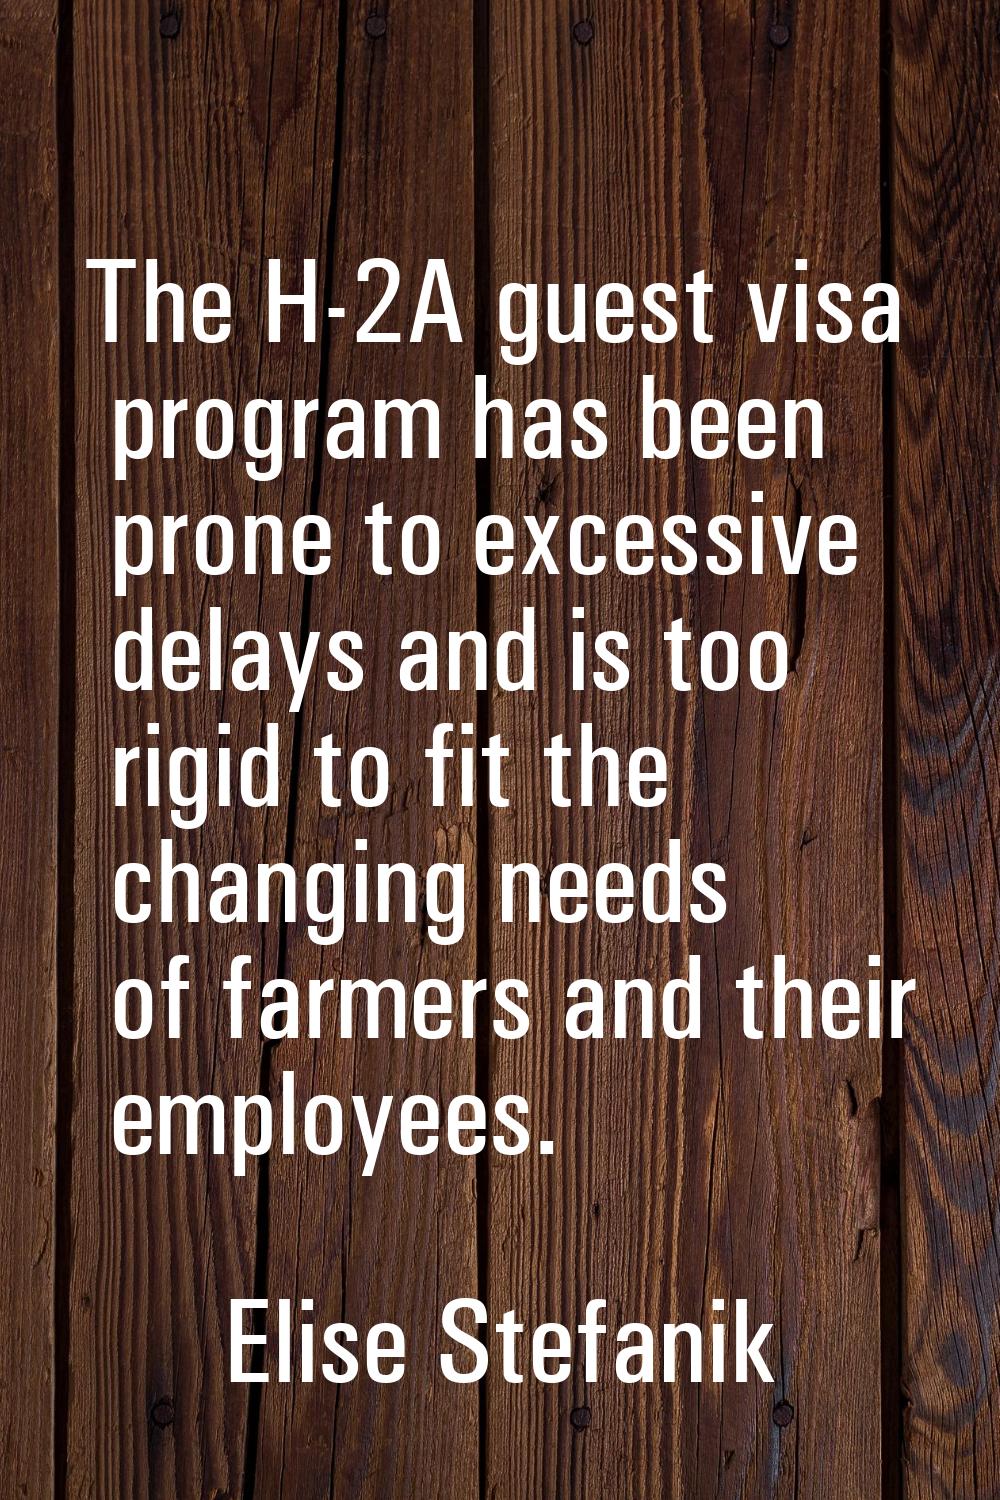 The H-2A guest visa program has been prone to excessive delays and is too rigid to fit the changing